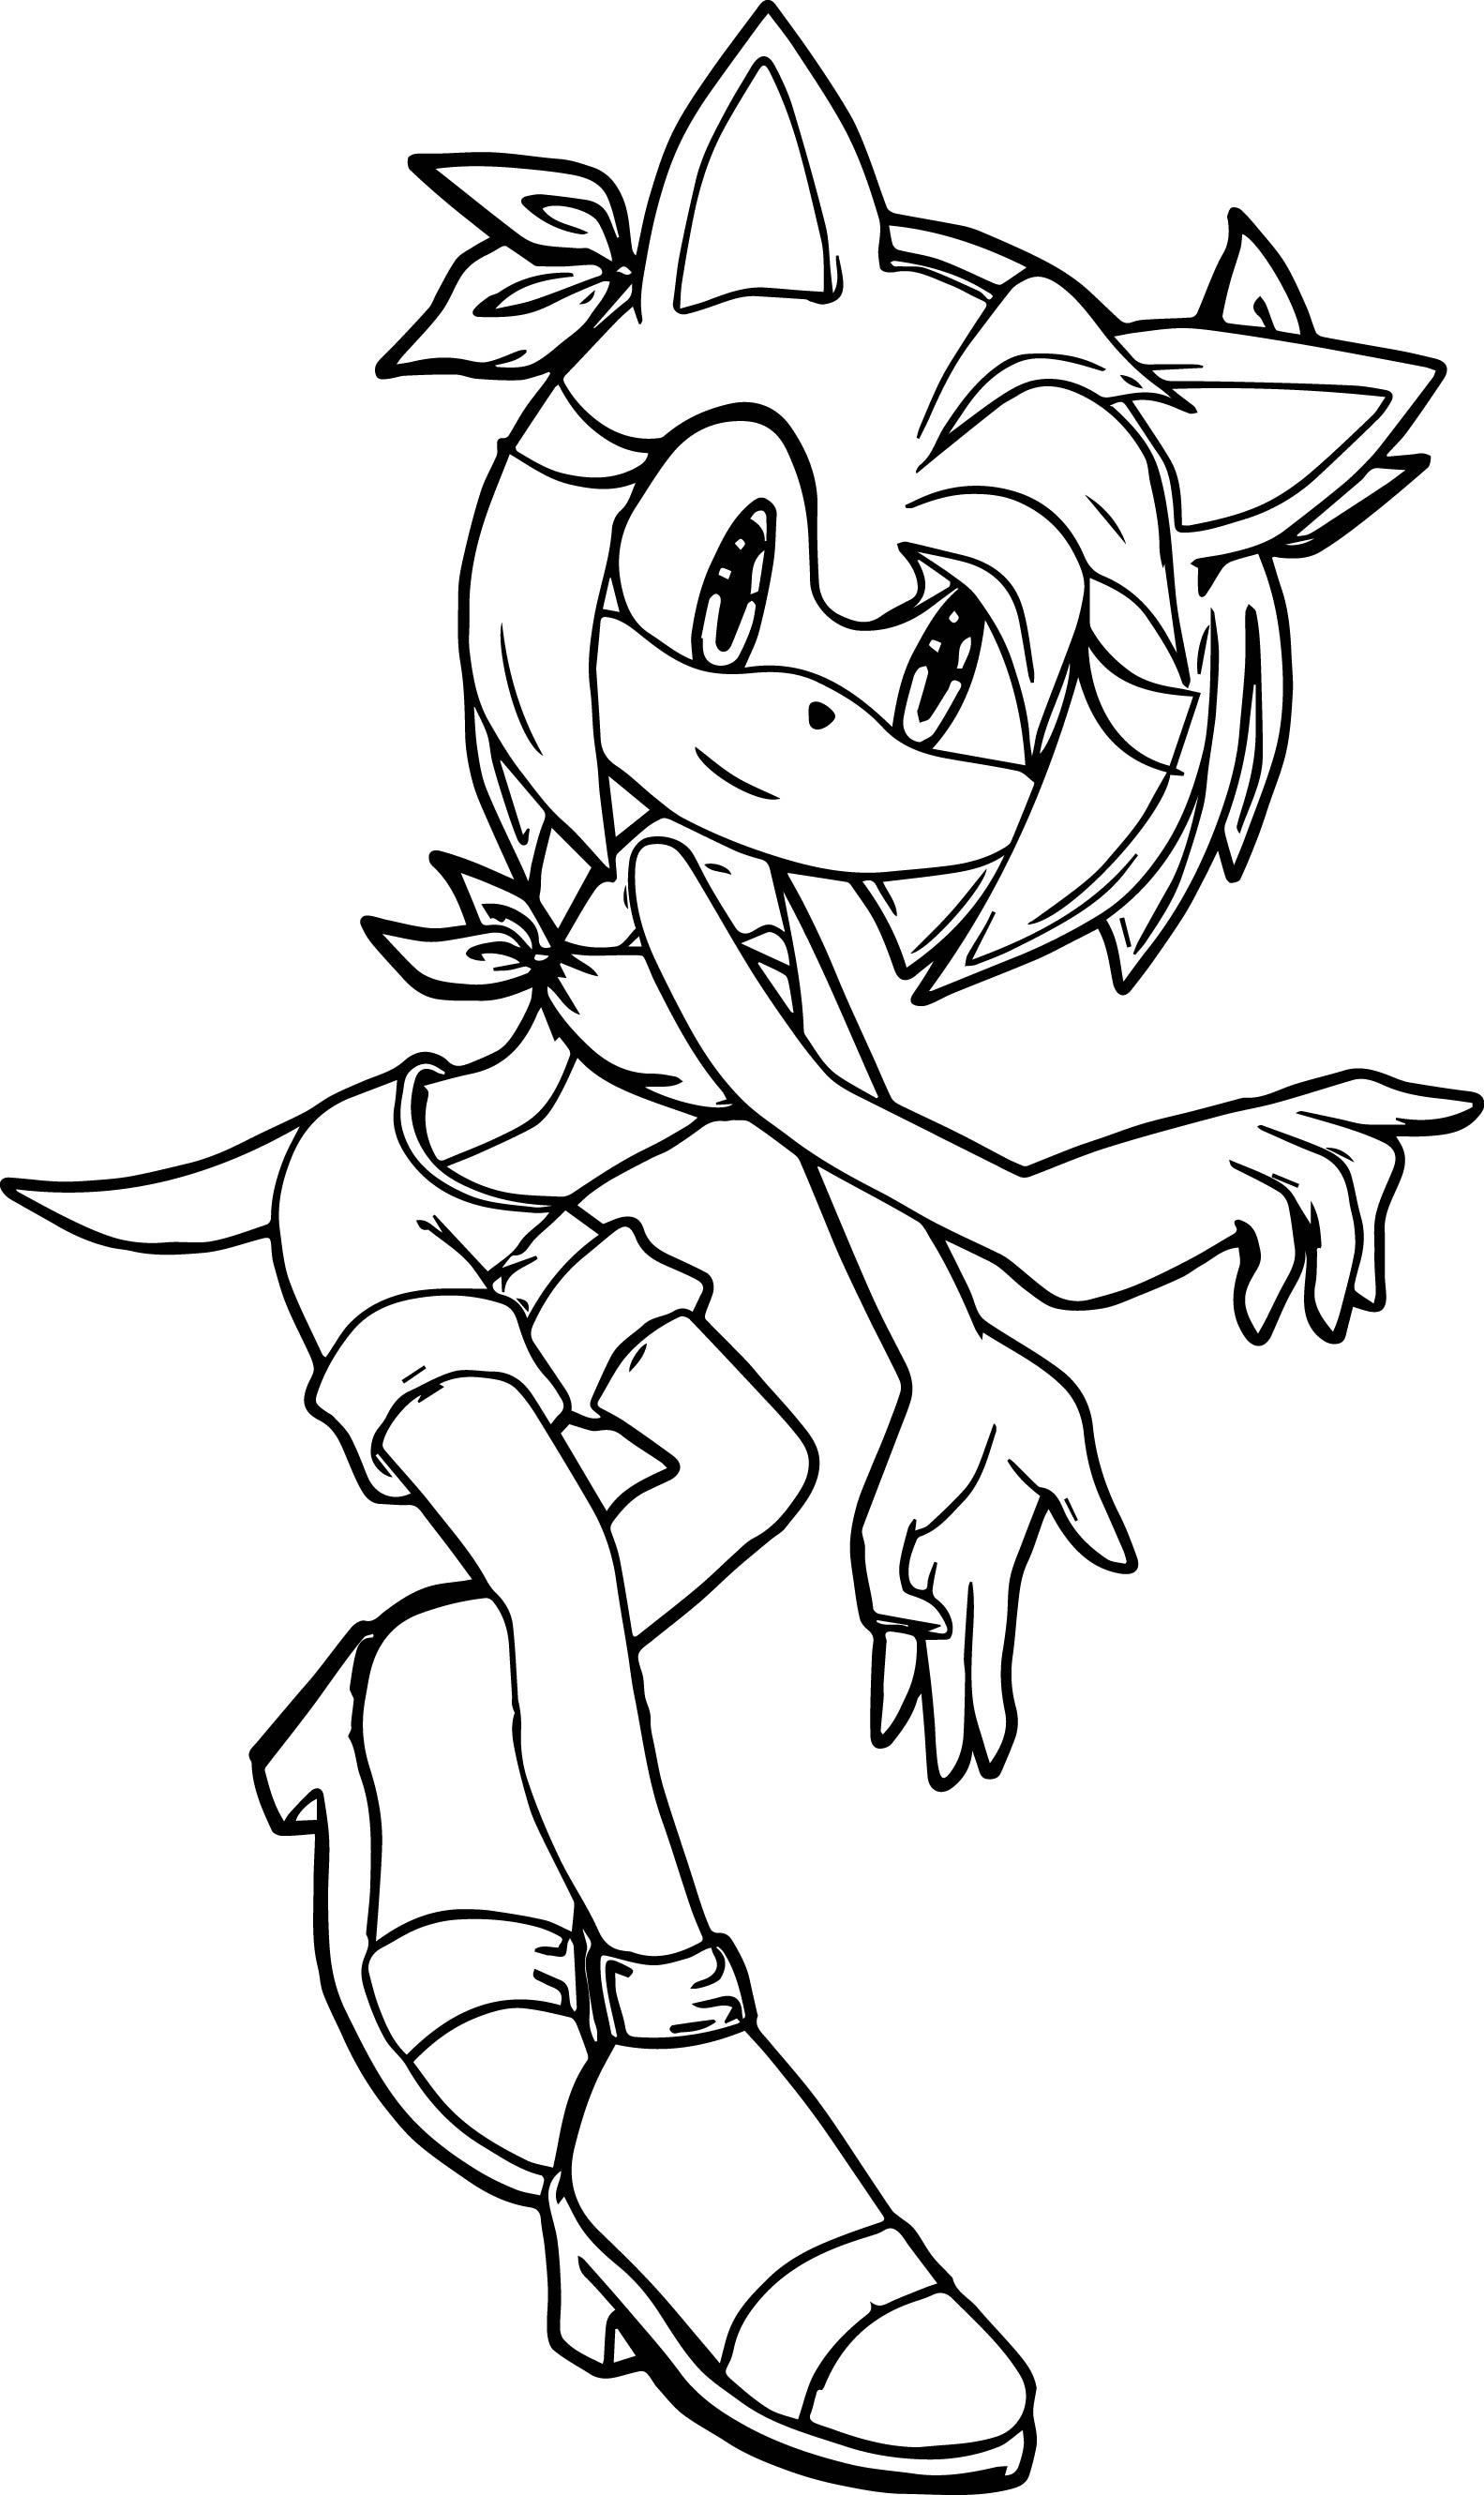 Rose Coloring Pages Amy Rose Coloring Page Wecoloringpage.